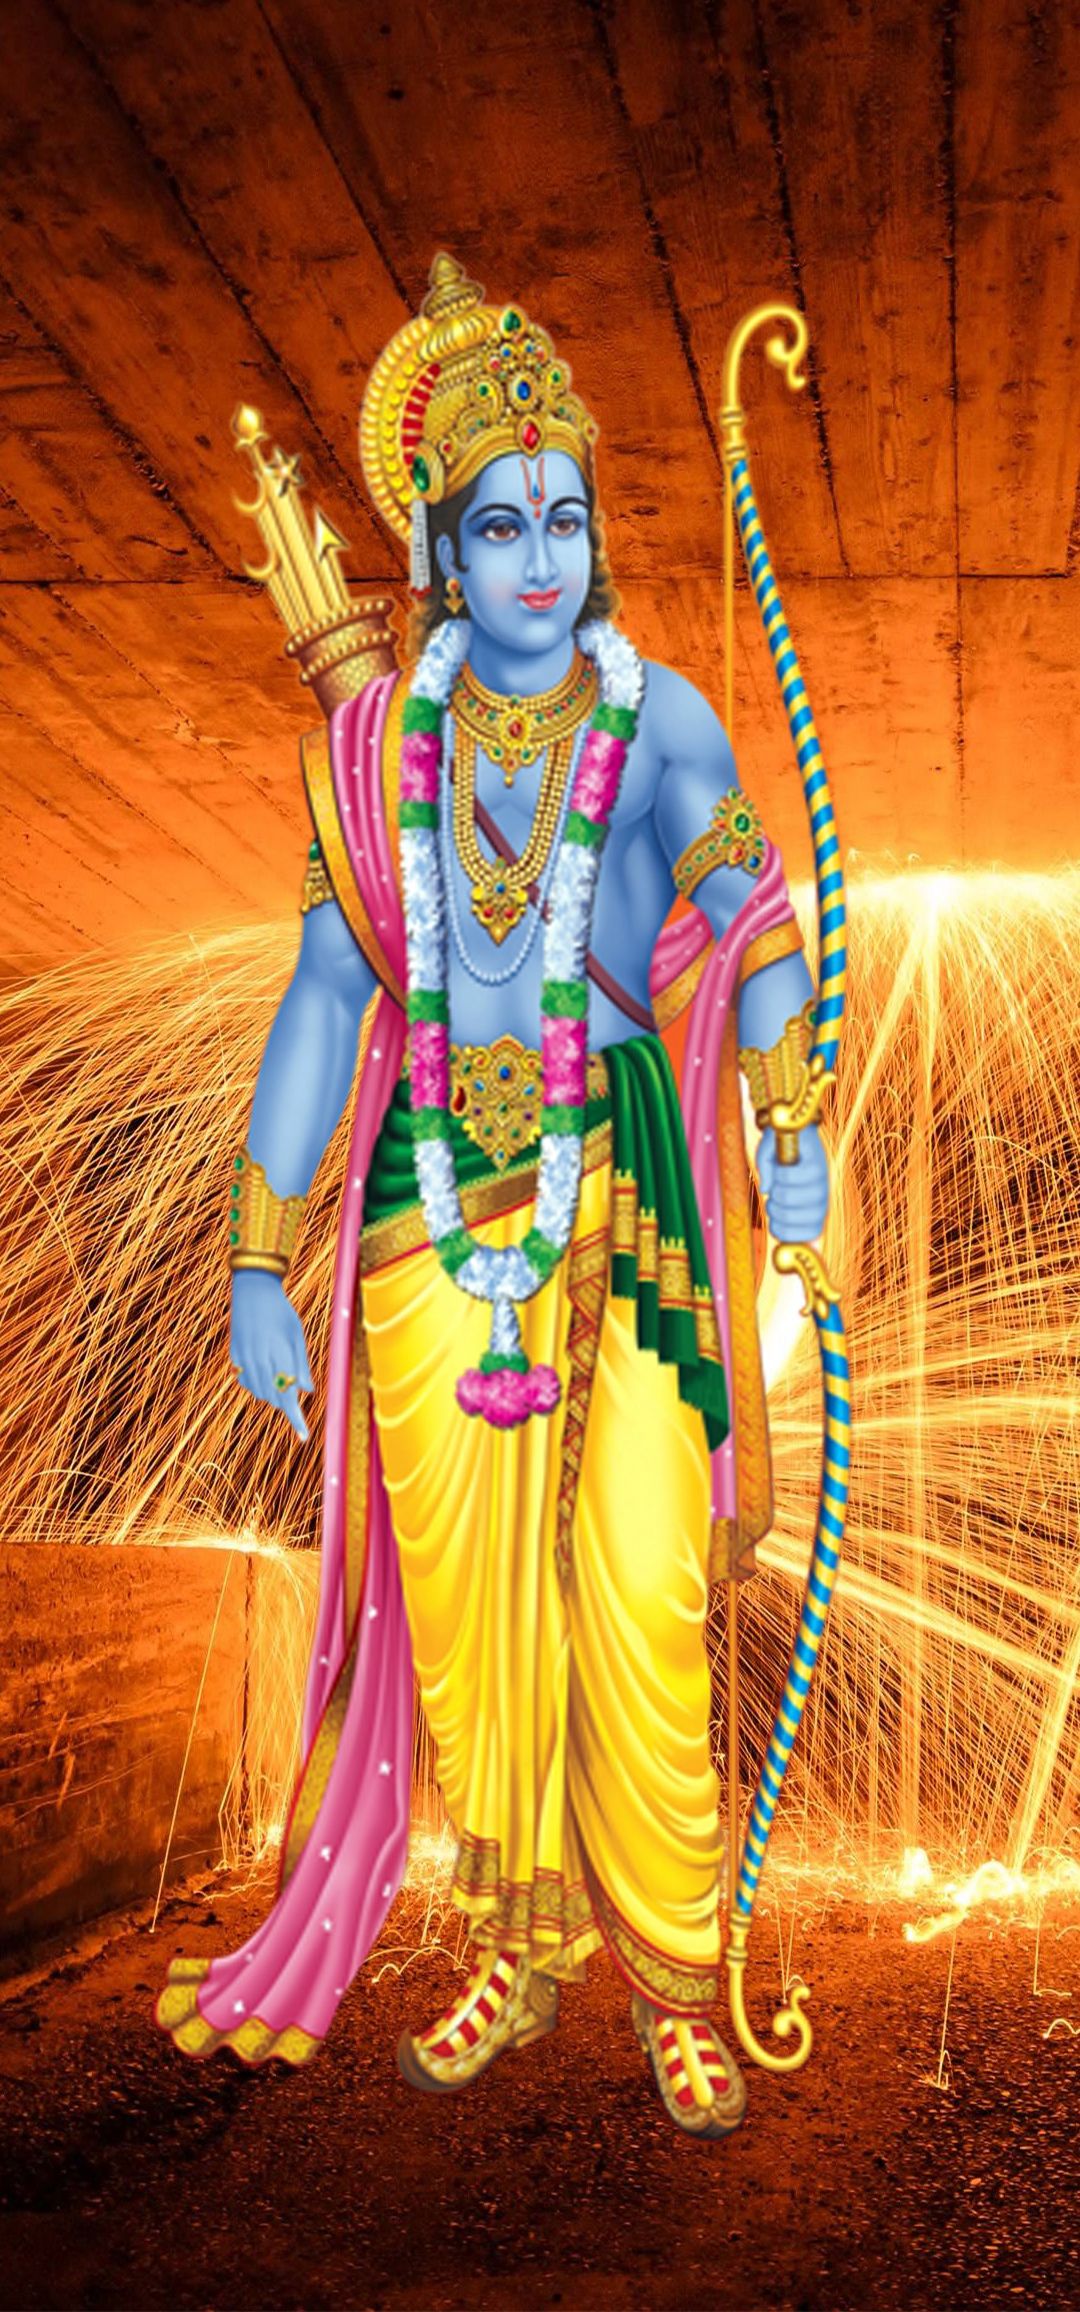 Lord Ram Mobile Wallpapers - Wallpaper Cave